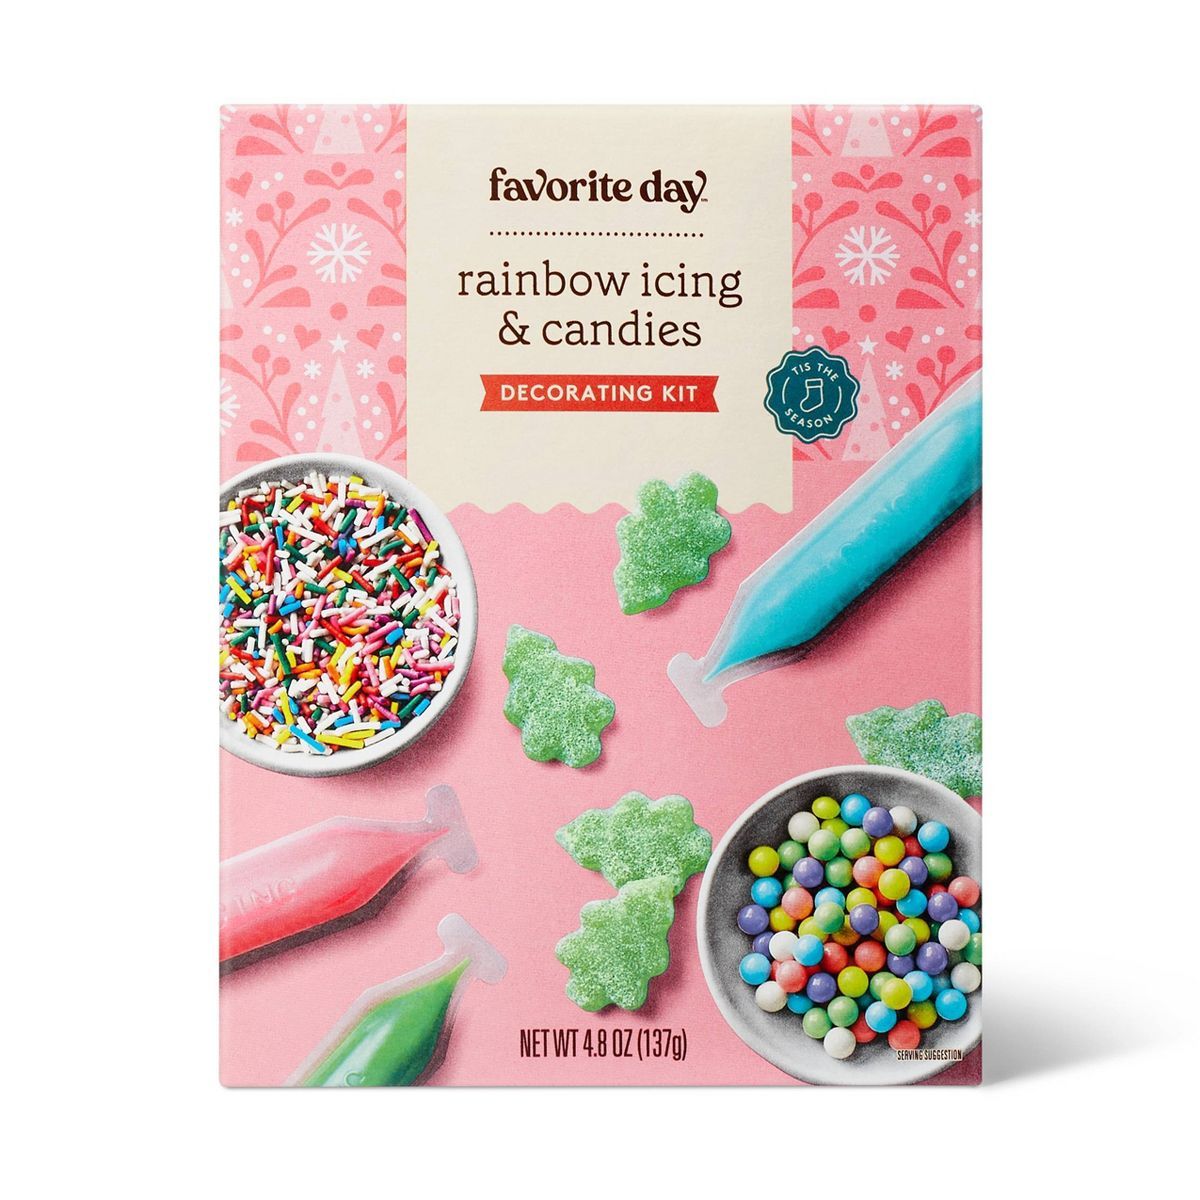 Holiday Rainbow Icing & Candies Decorating Kit - 5oz - Favorite Day™ | Target